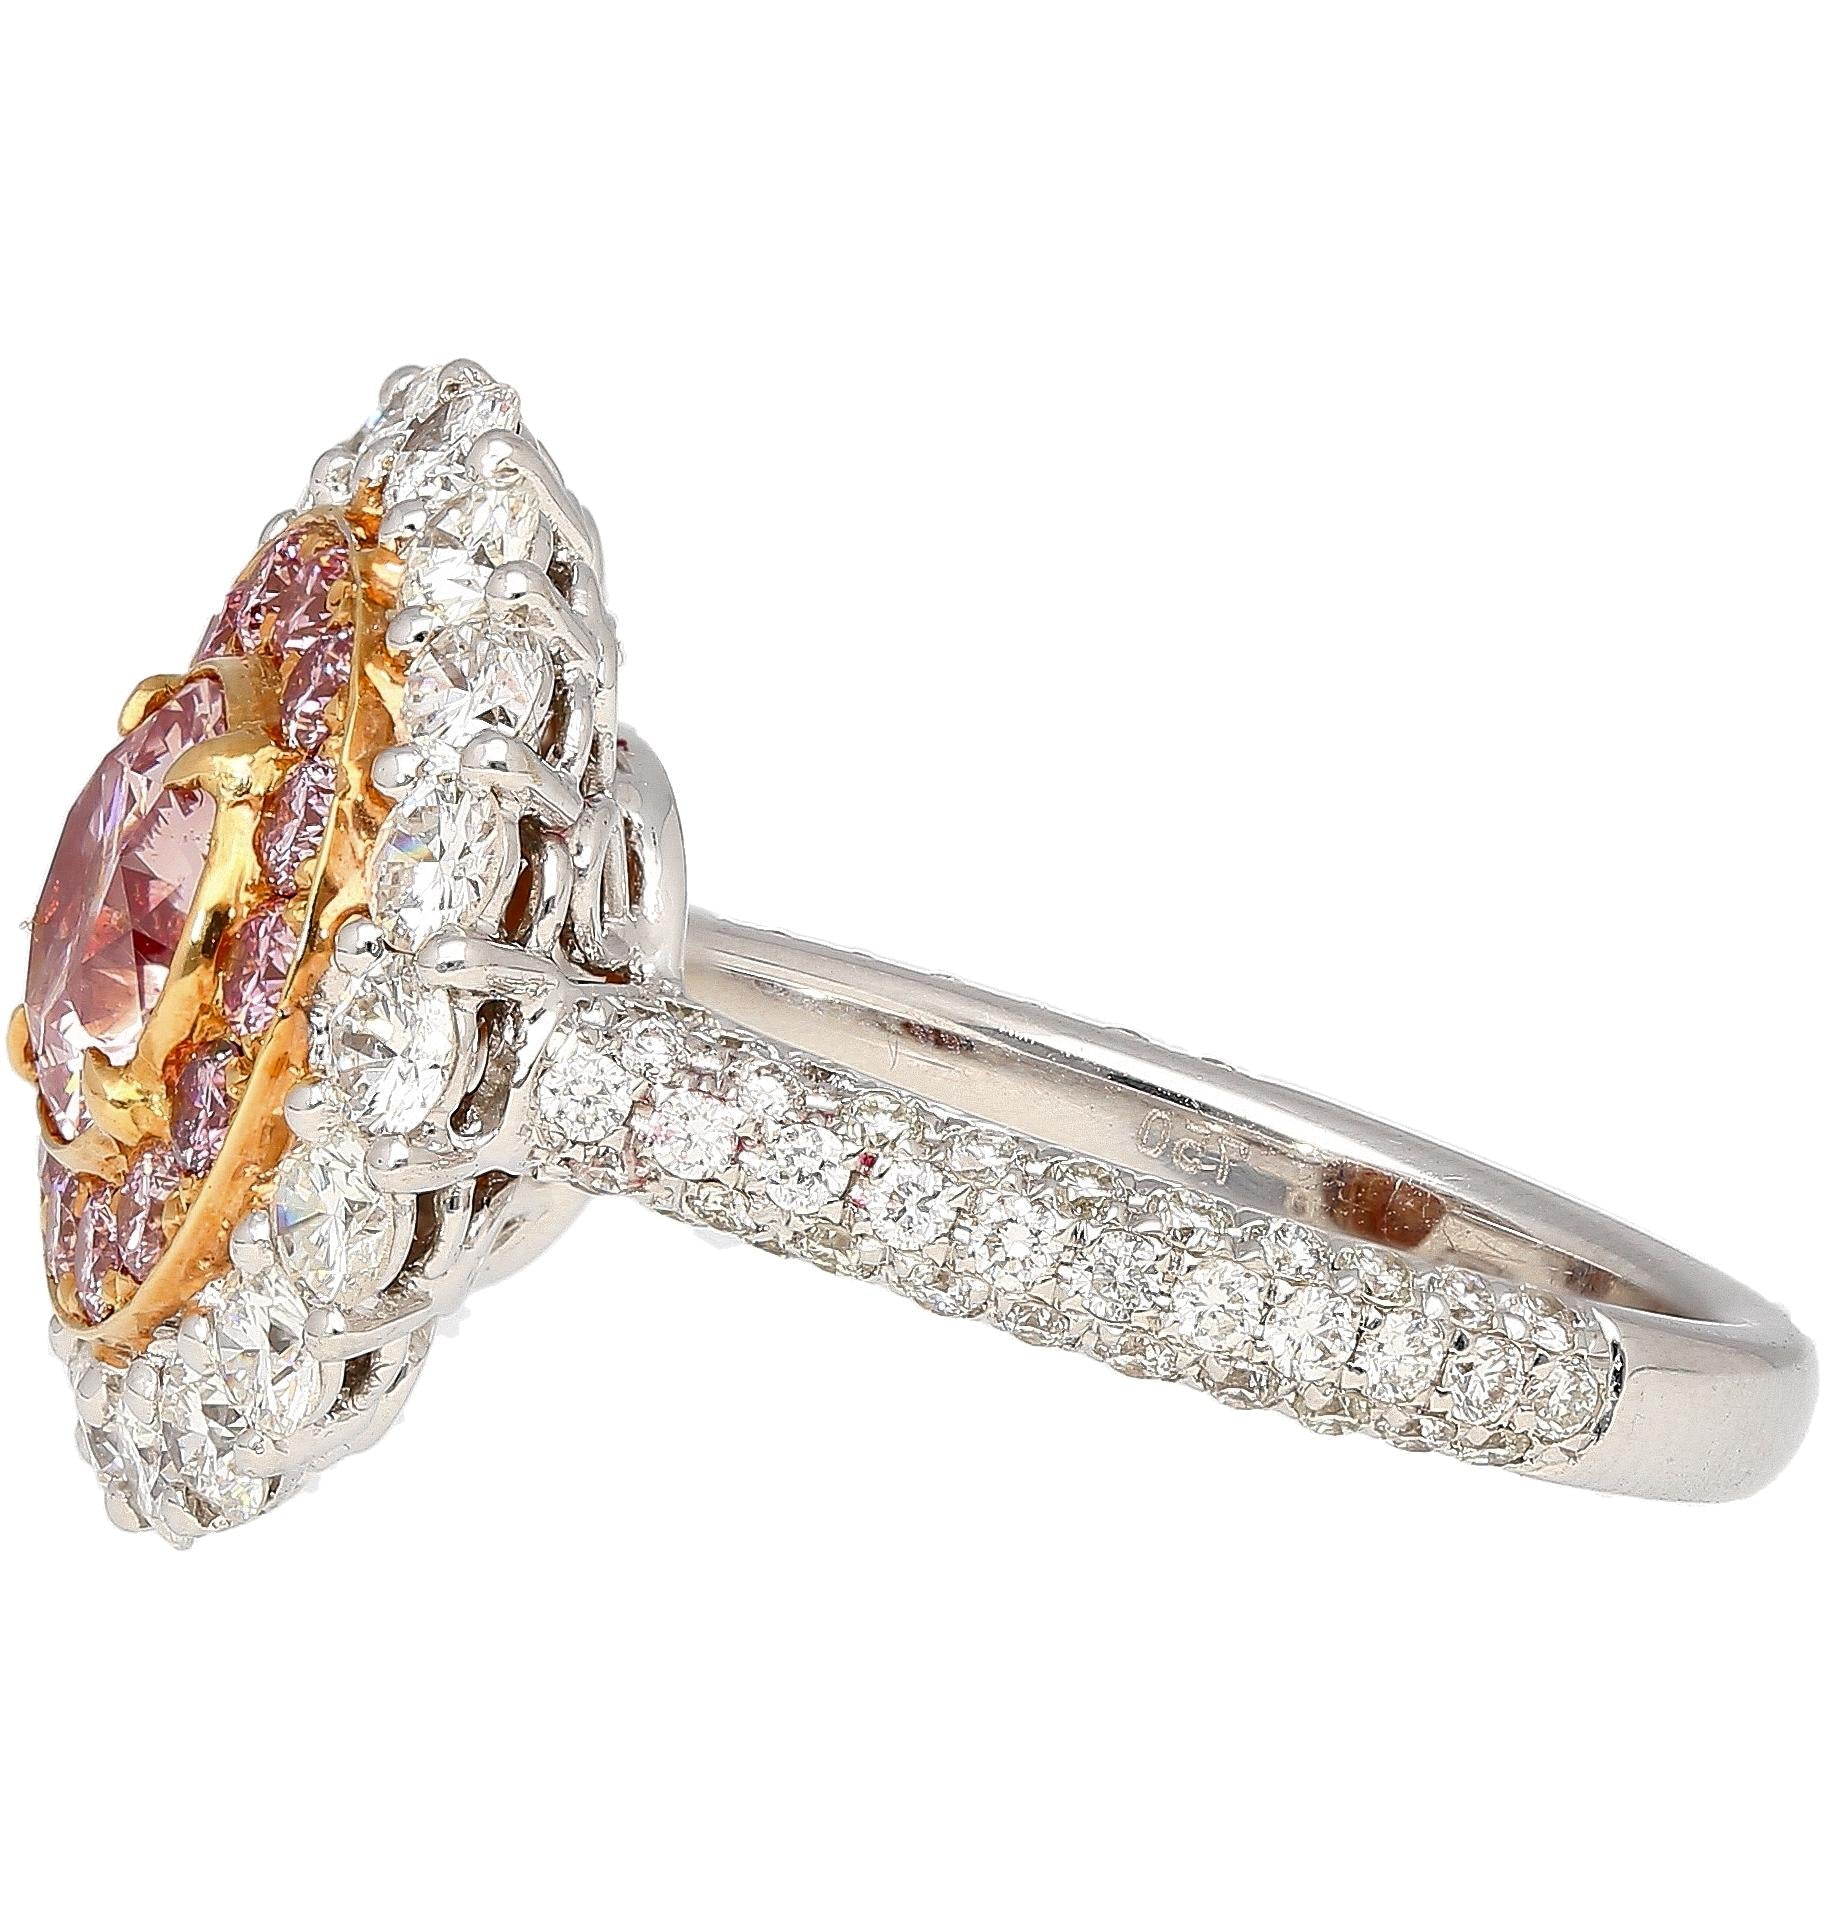 GIA Certified Round Cut Pink Diamond Halo Ring Crafted in 18k White & Rose Gold